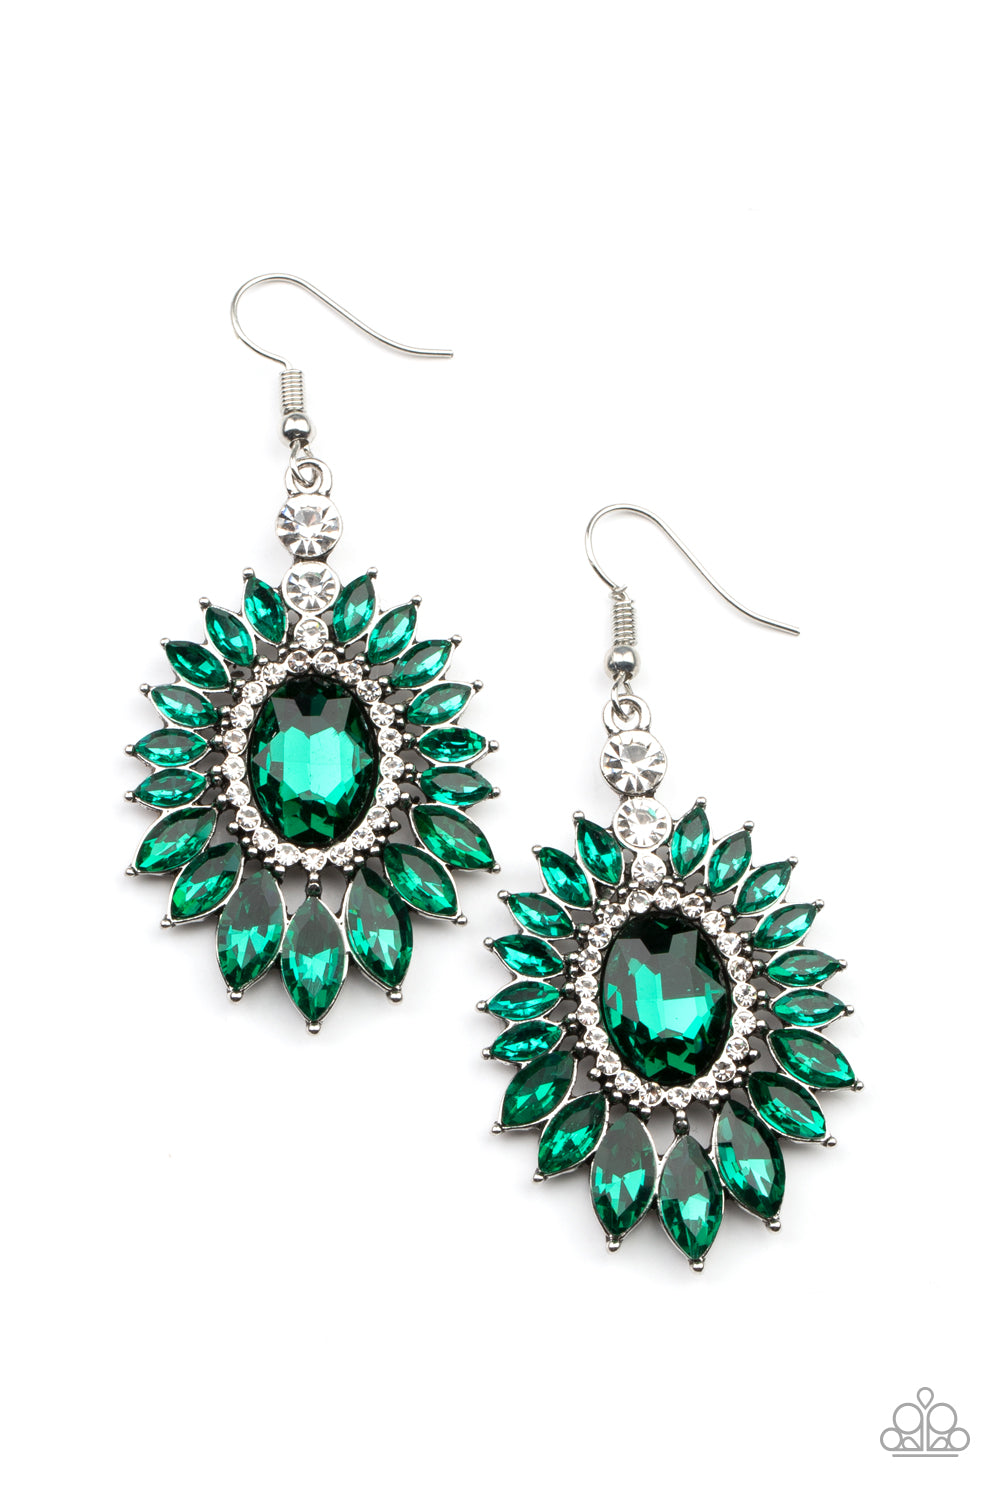 Big Time Twinkle Green Earring - Paparazzi Accessories   Glittery dark green marquise cut rhinestones fan out from a green oval gem center bordered in dainty white rhinestones, creating a sparkly floral frame. Earring attaches to a standard fishhook fitting.  All Paparazzi Accessories are lead free and nickel free!  Sold as one pair of earrings.